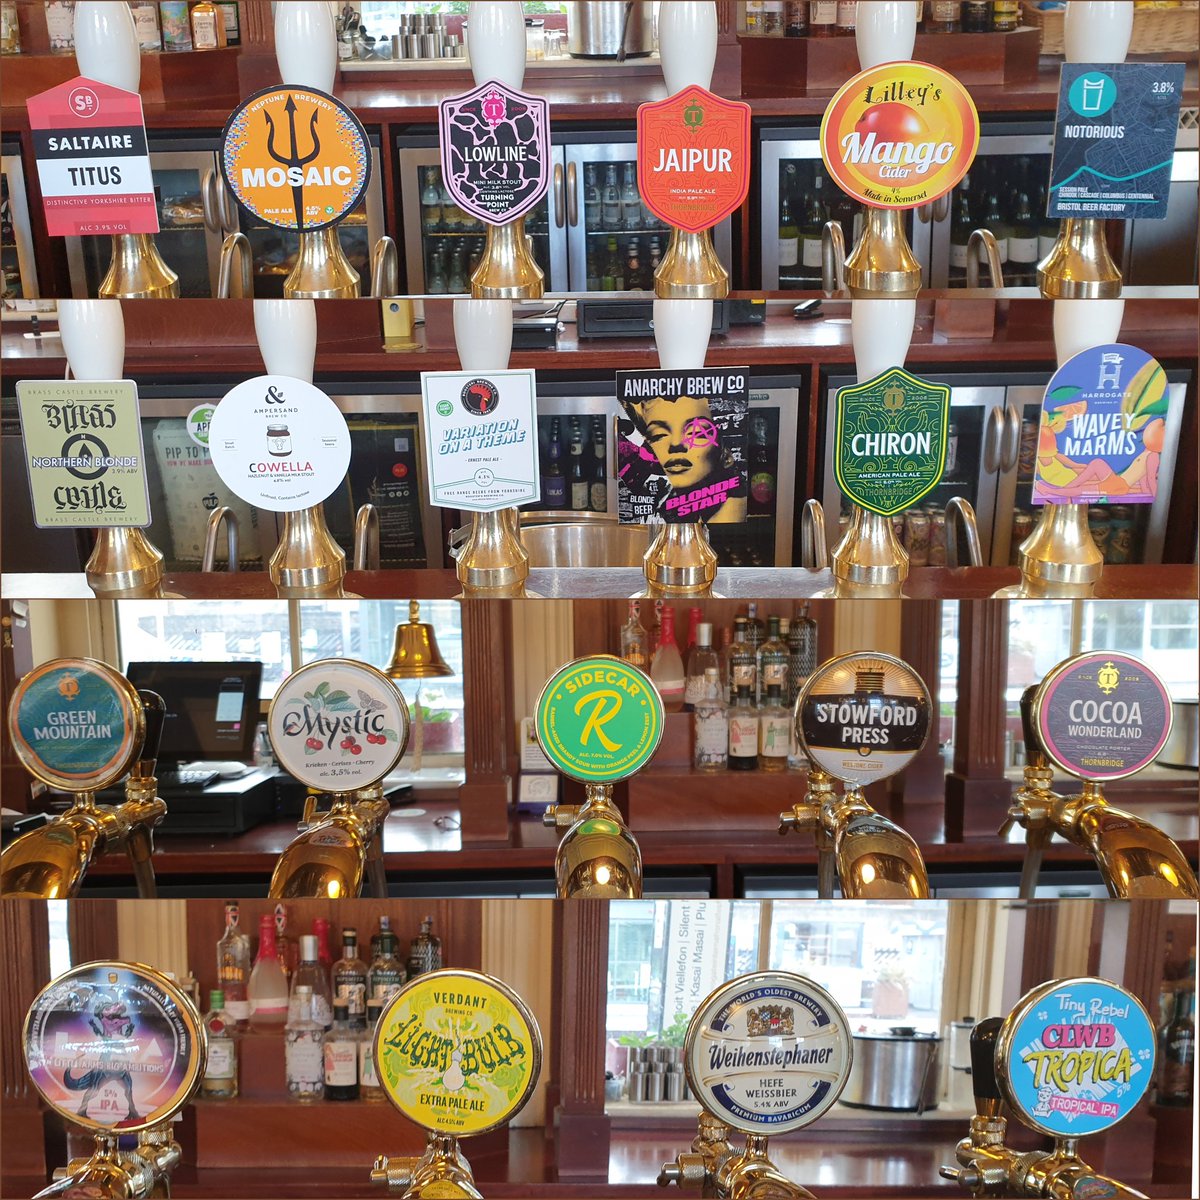 Friday line up! Some entirely new beers and some absolute classics as well, something for everyone as they say! 🍻 ☀️

#harrogate #caskbeer #kegbeer #craft #ipa #sour #stout #porter #bitter #sessionipa #americanpale #hazypale #glutenfree #veganfriendly